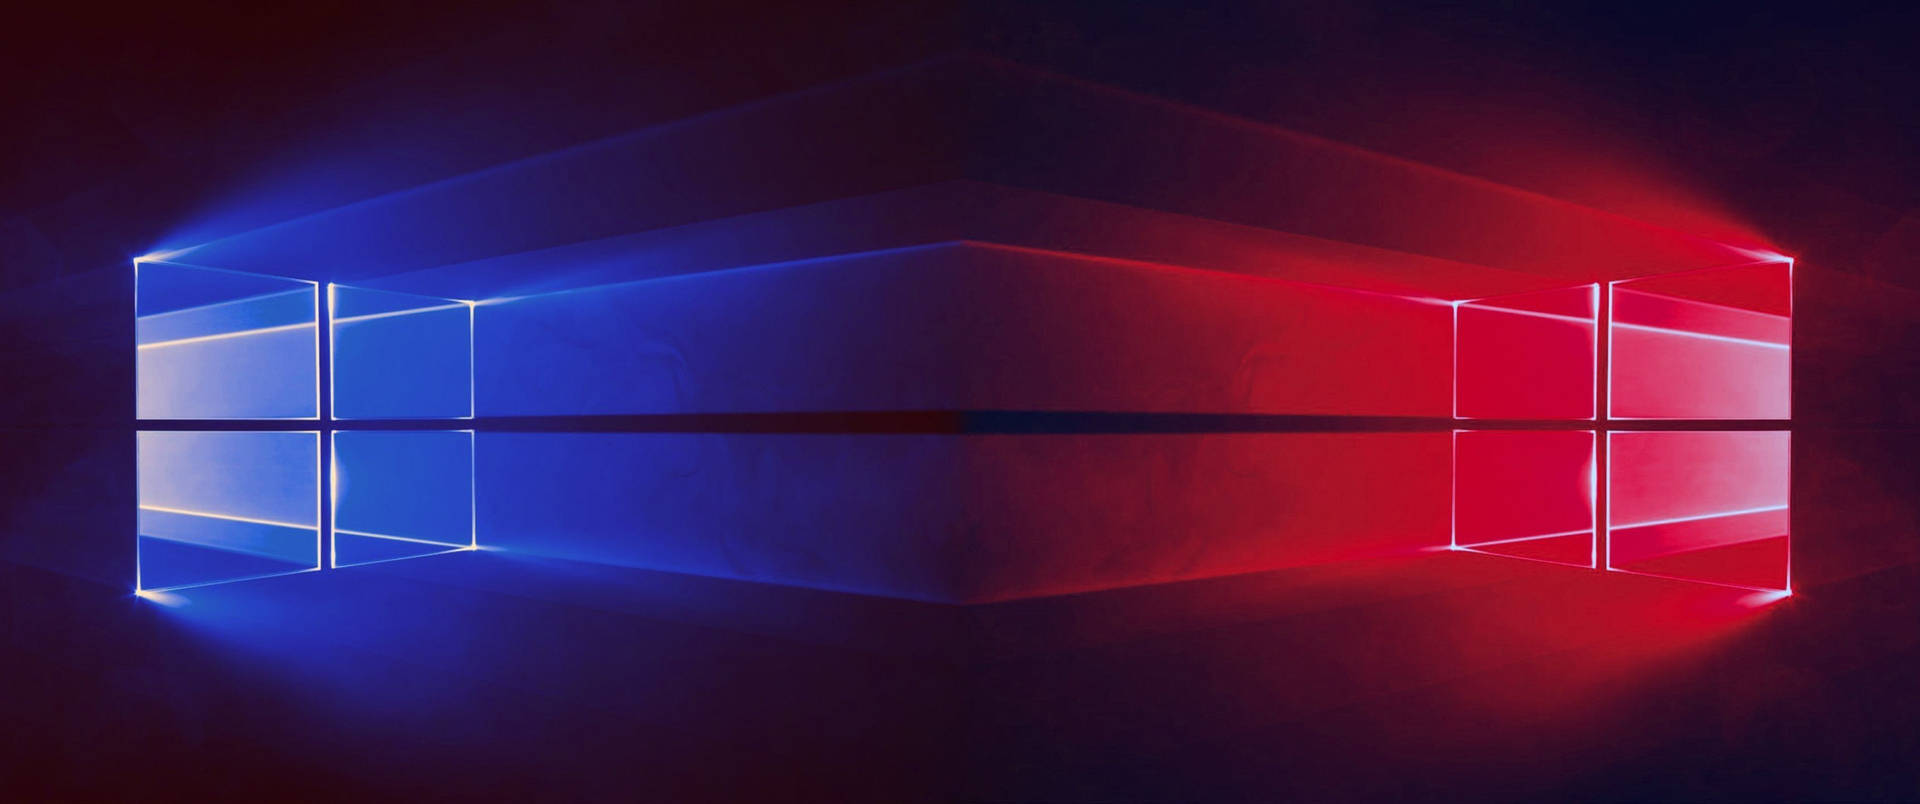 Windows 10 3440X1440 Wallpaper and Background Image